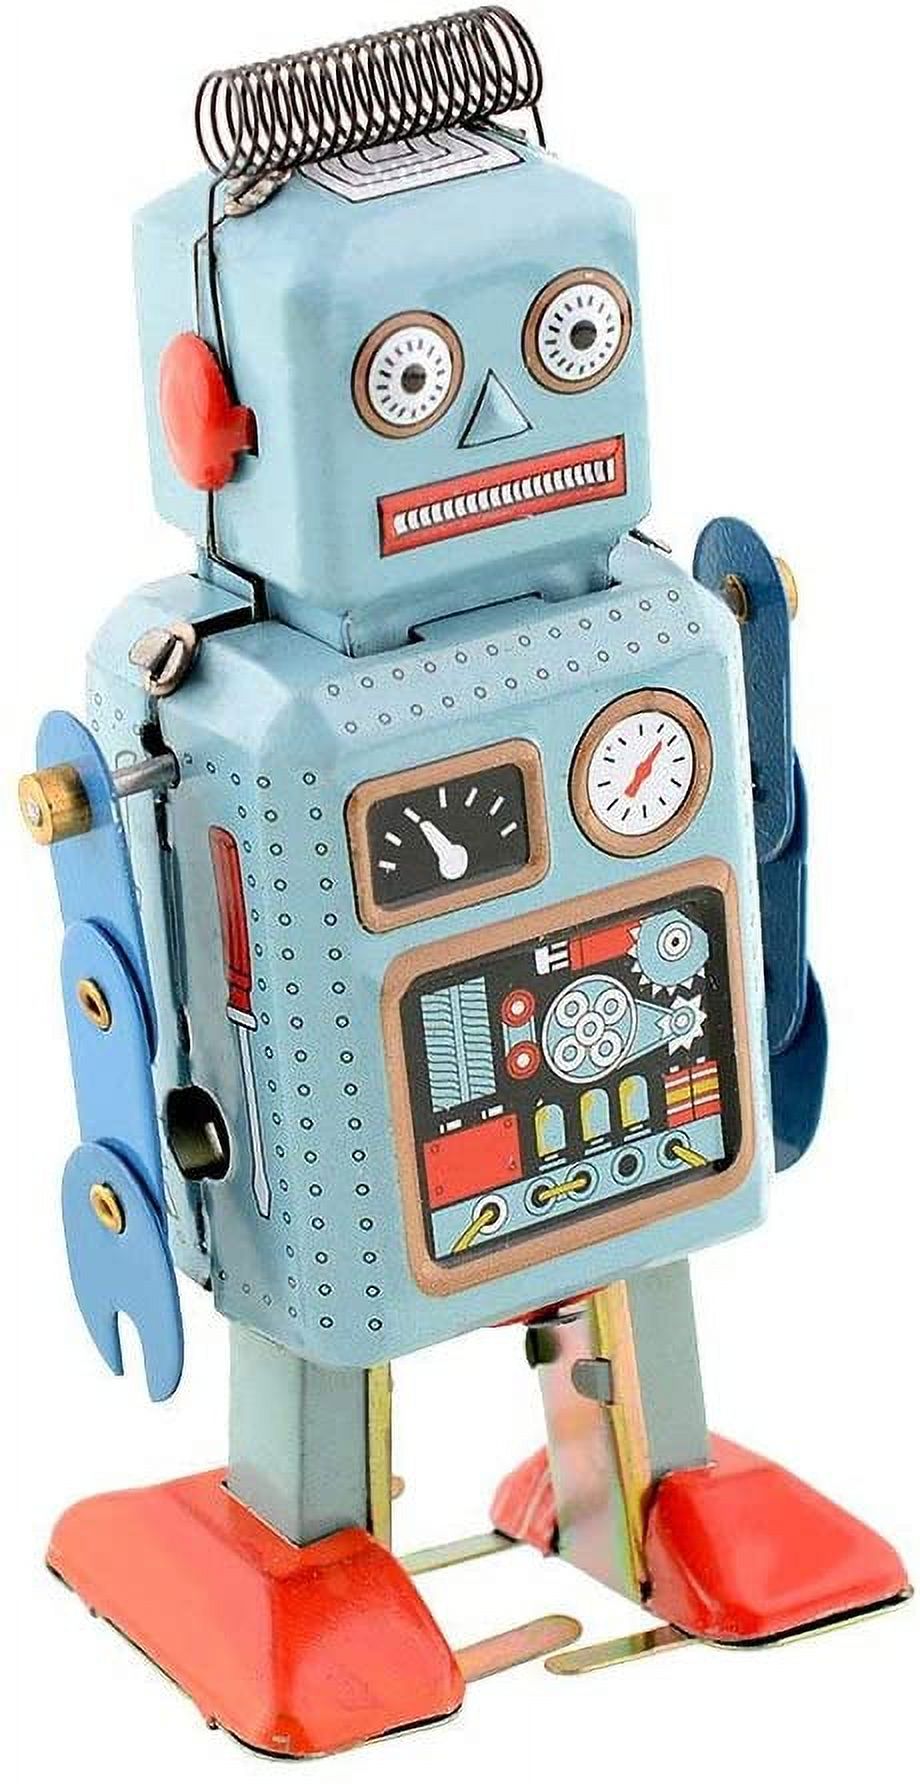 Wind Up Vintage Robot Retro Classic Clockwork Spring for Collection, Xmas, Gift, Party, Birthday, Festival, Surprise, Memories - image 1 of 6